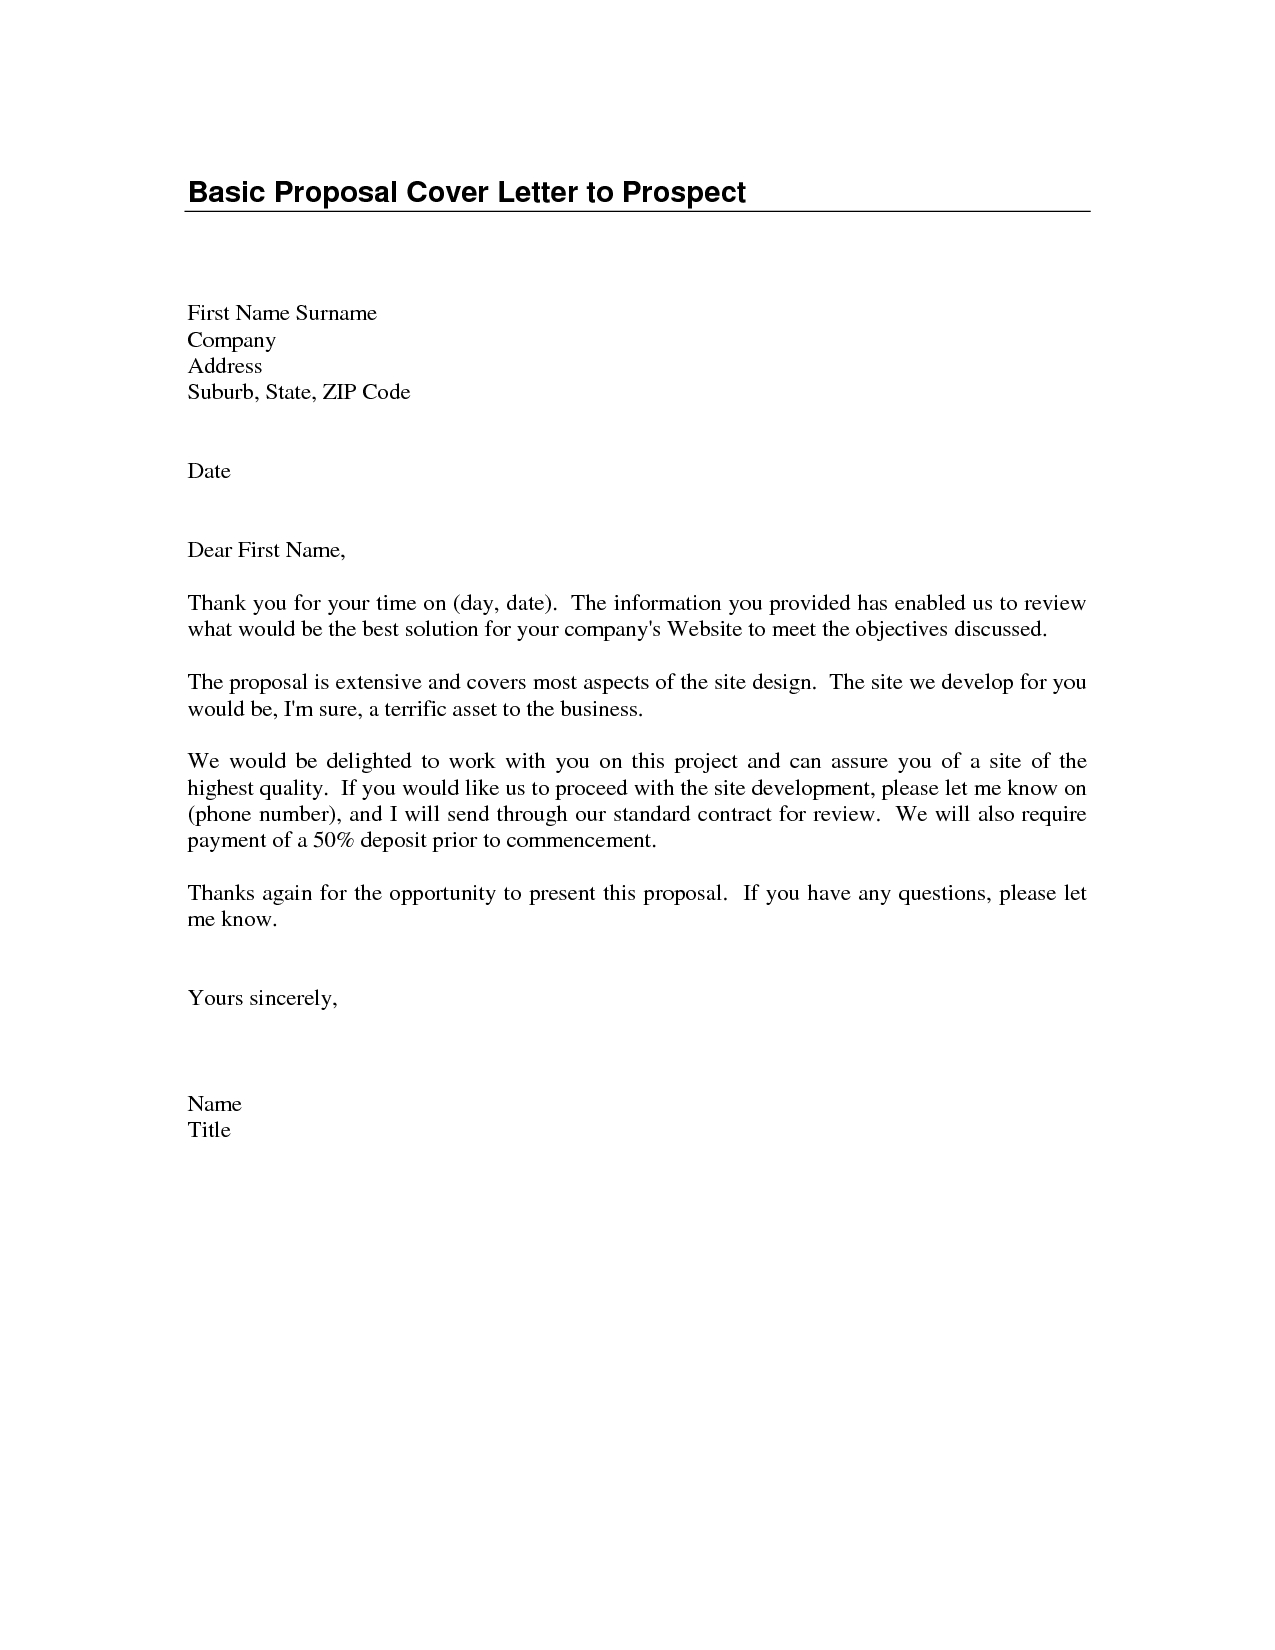 Basic Cover Letter Example - IMAGESEE